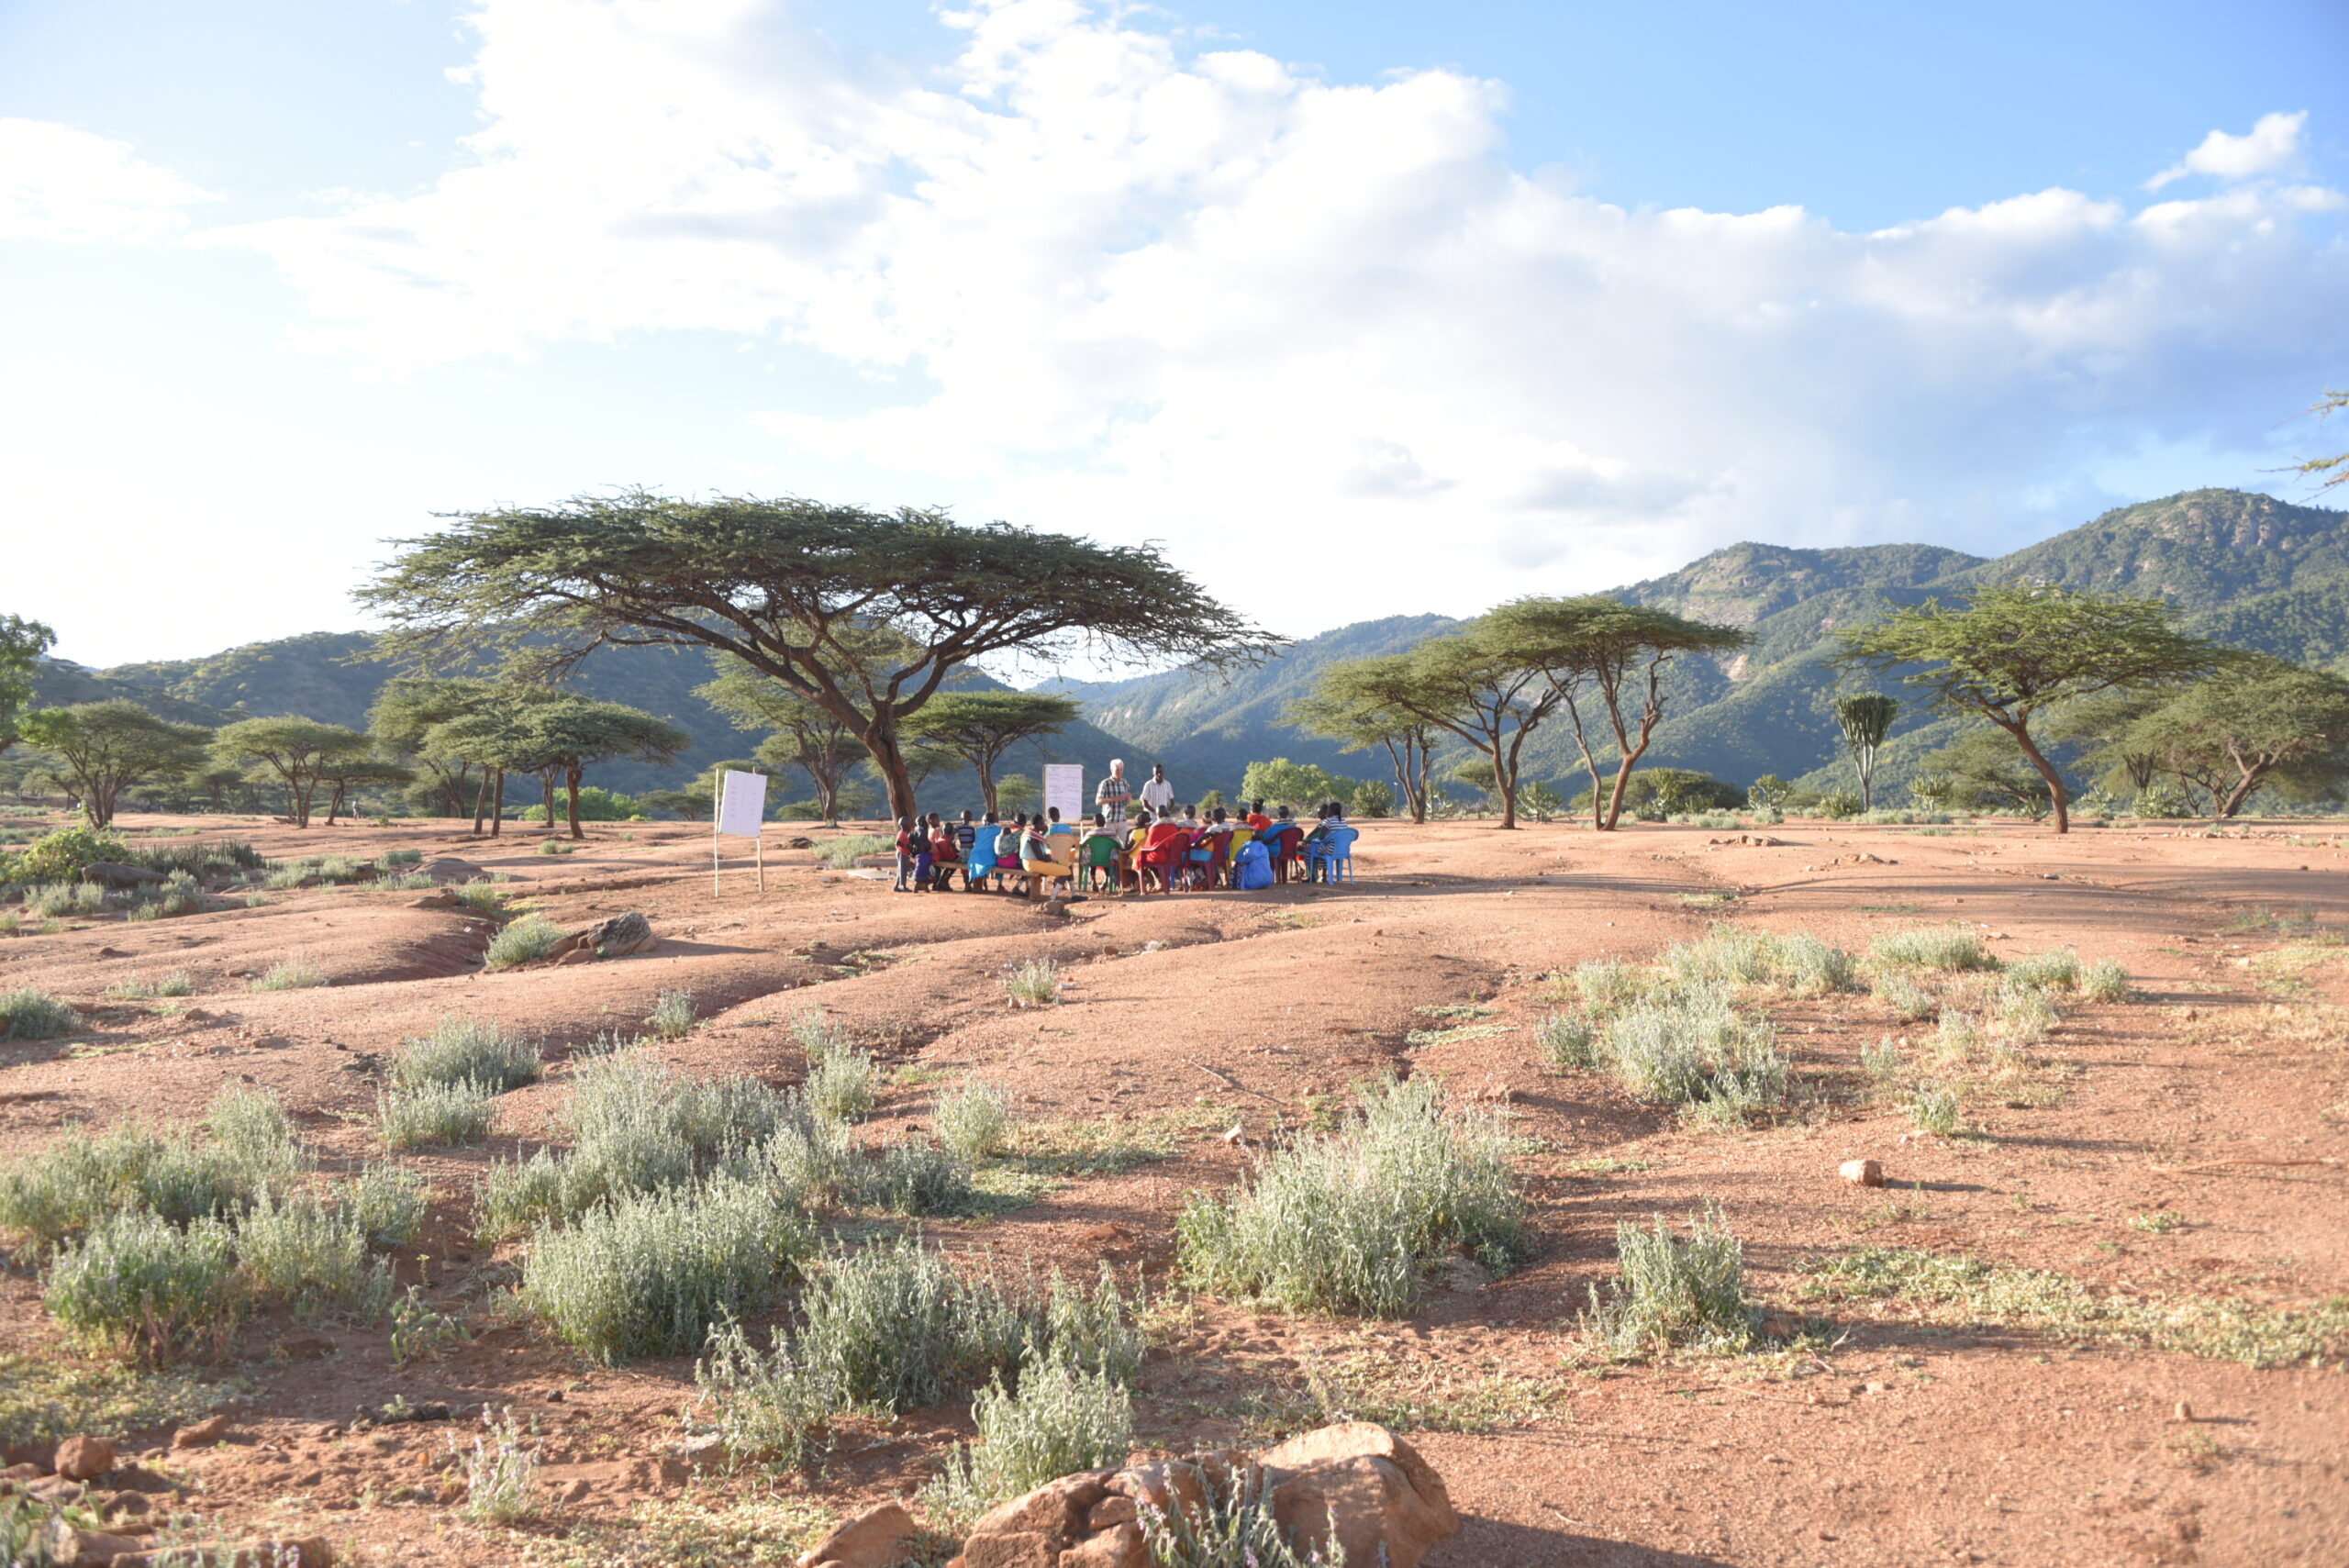 Allan Ward, Leadership and Management Program facilitator conducting a training session under a tree with local Kenyan conservancy members.